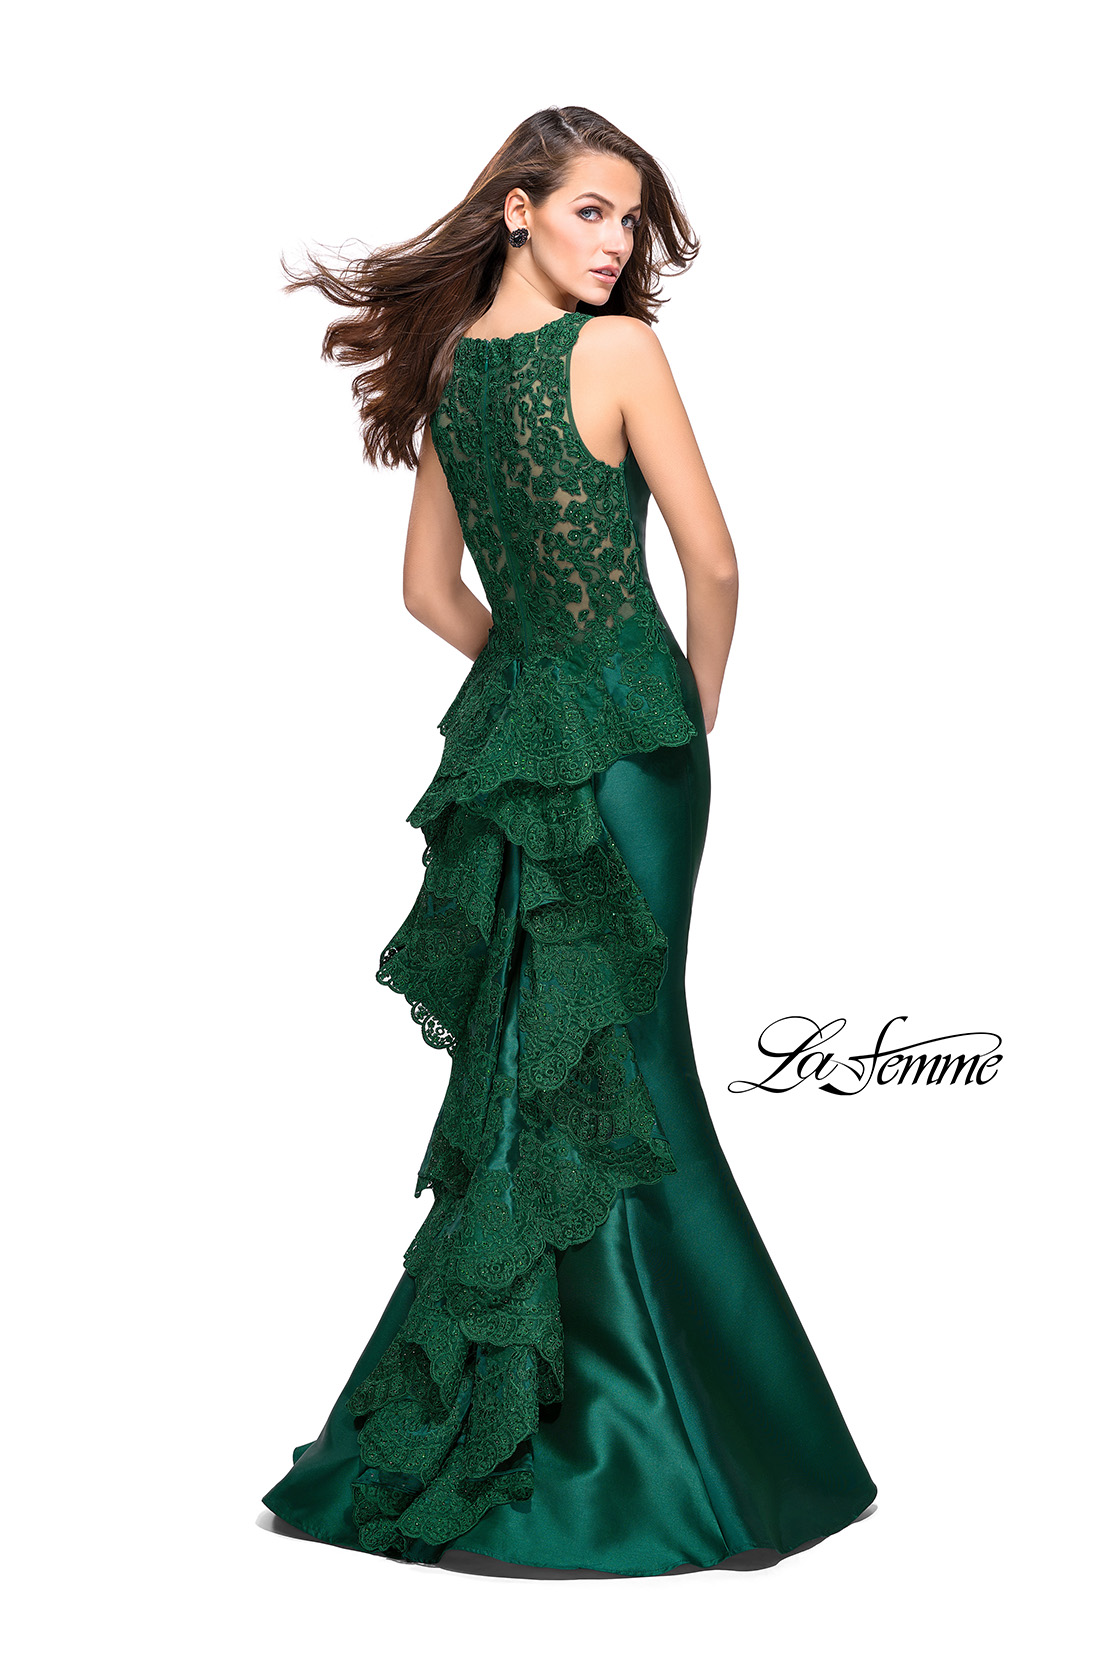 Green with Envy: Stand Out in a Striking Green Prom Dress